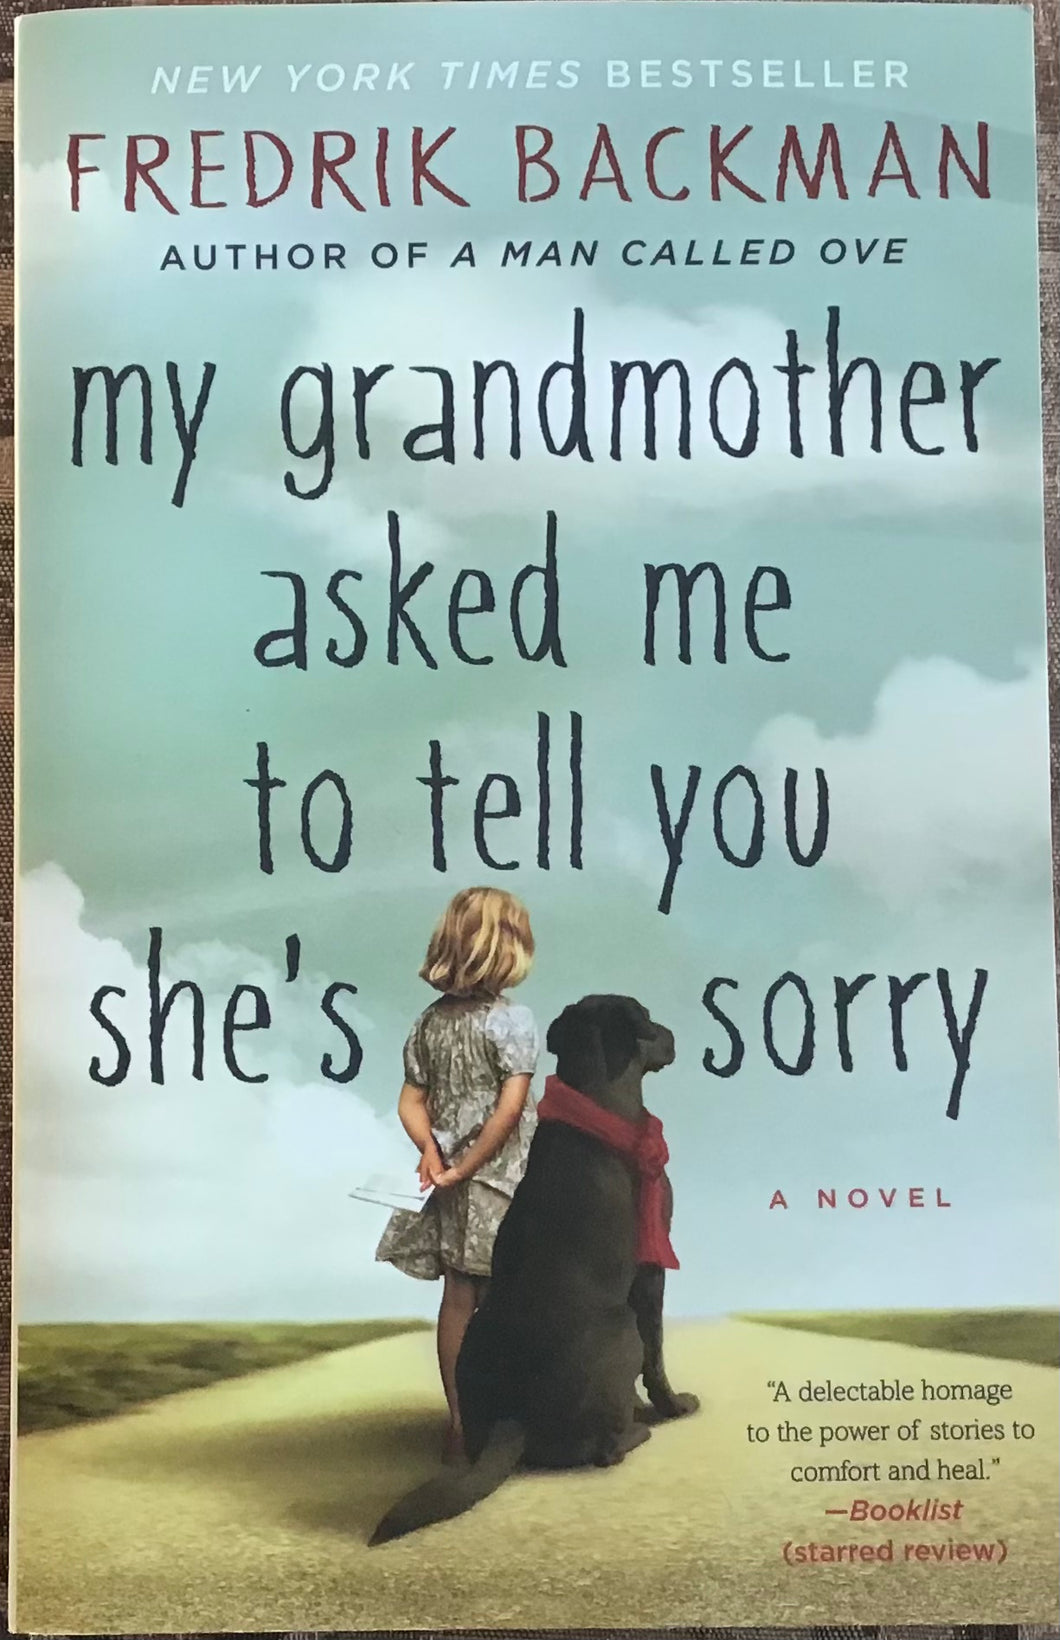 My Grandmother Asked Me To Tell You She’s Sorry, Fredrik Backman